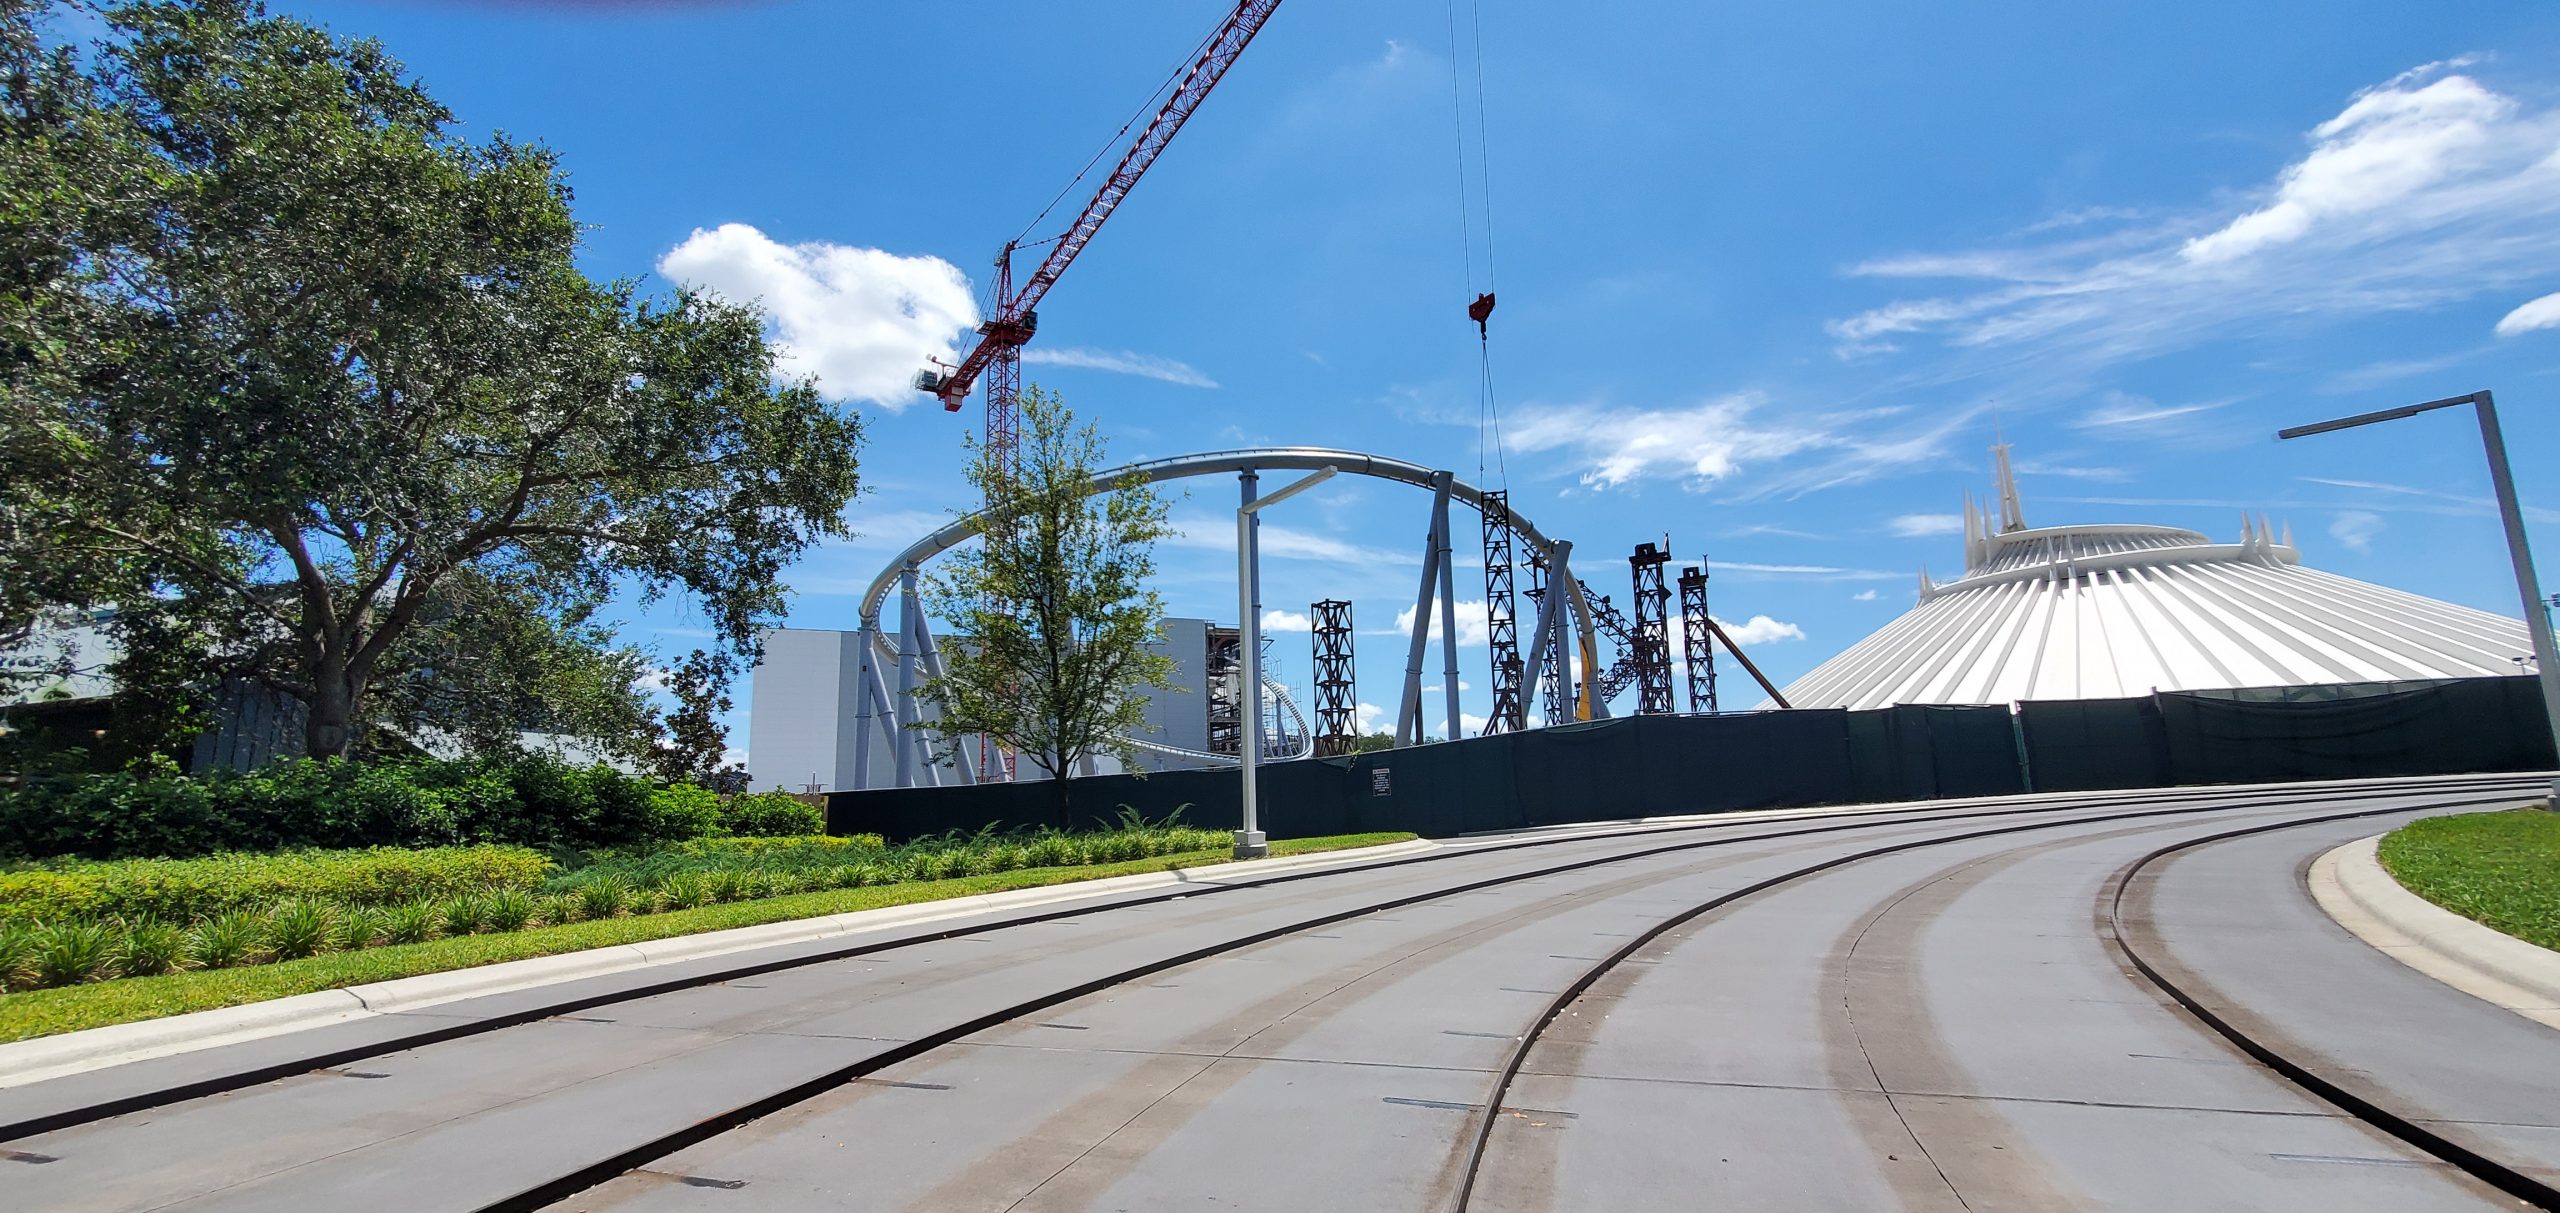 Tron Coaster Contruction update from the Magic Kingdom